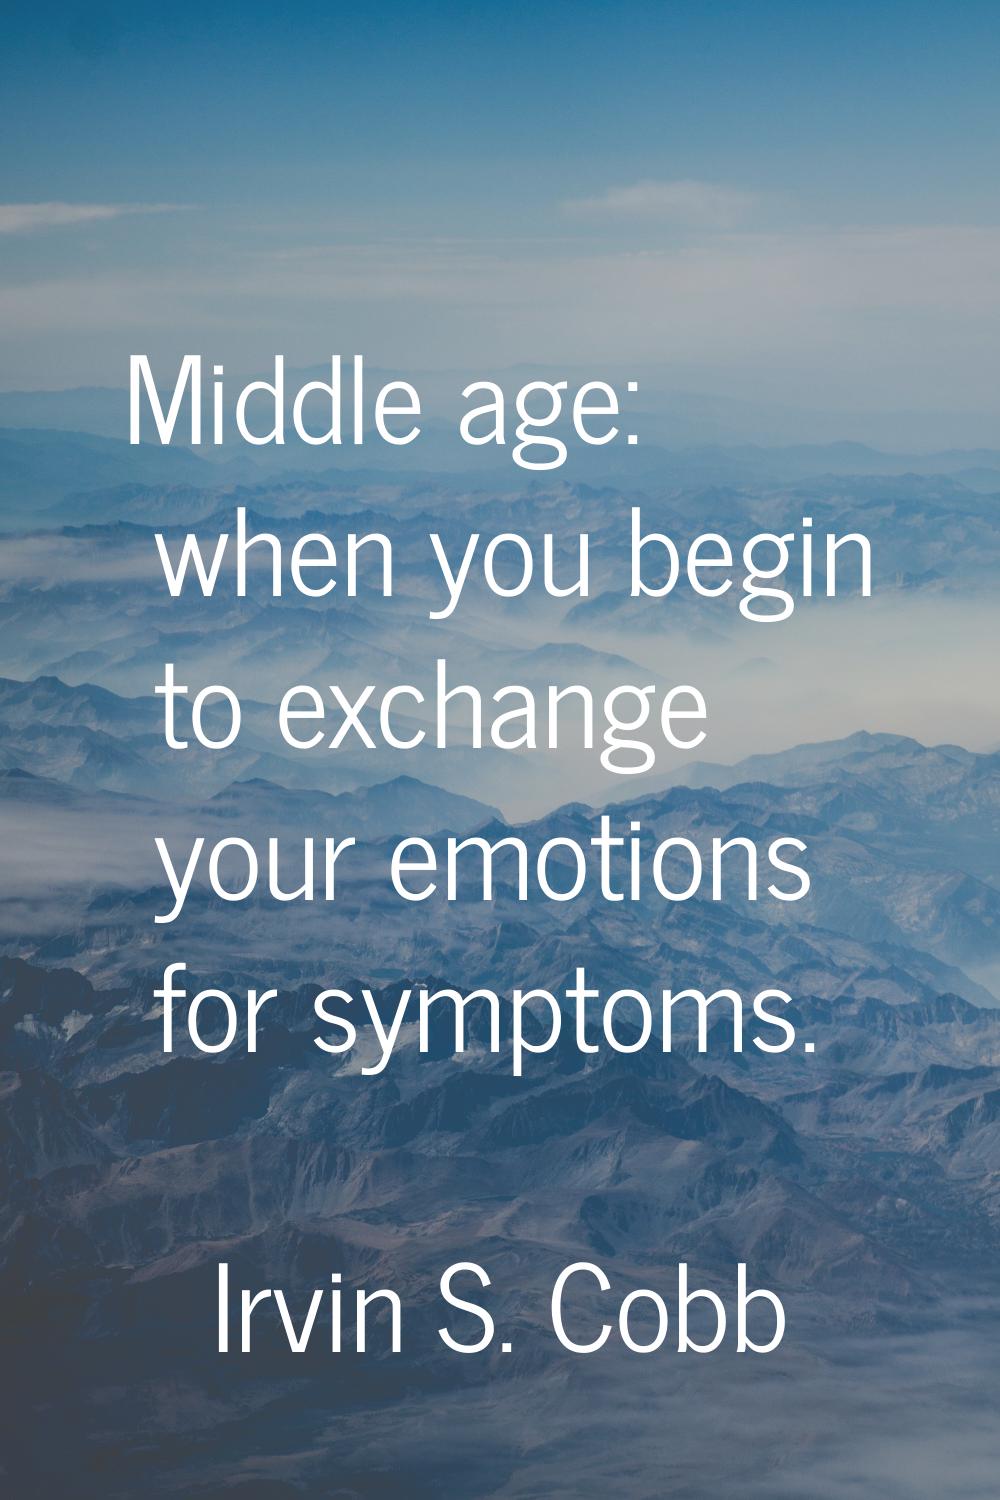 Middle age: when you begin to exchange your emotions for symptoms.